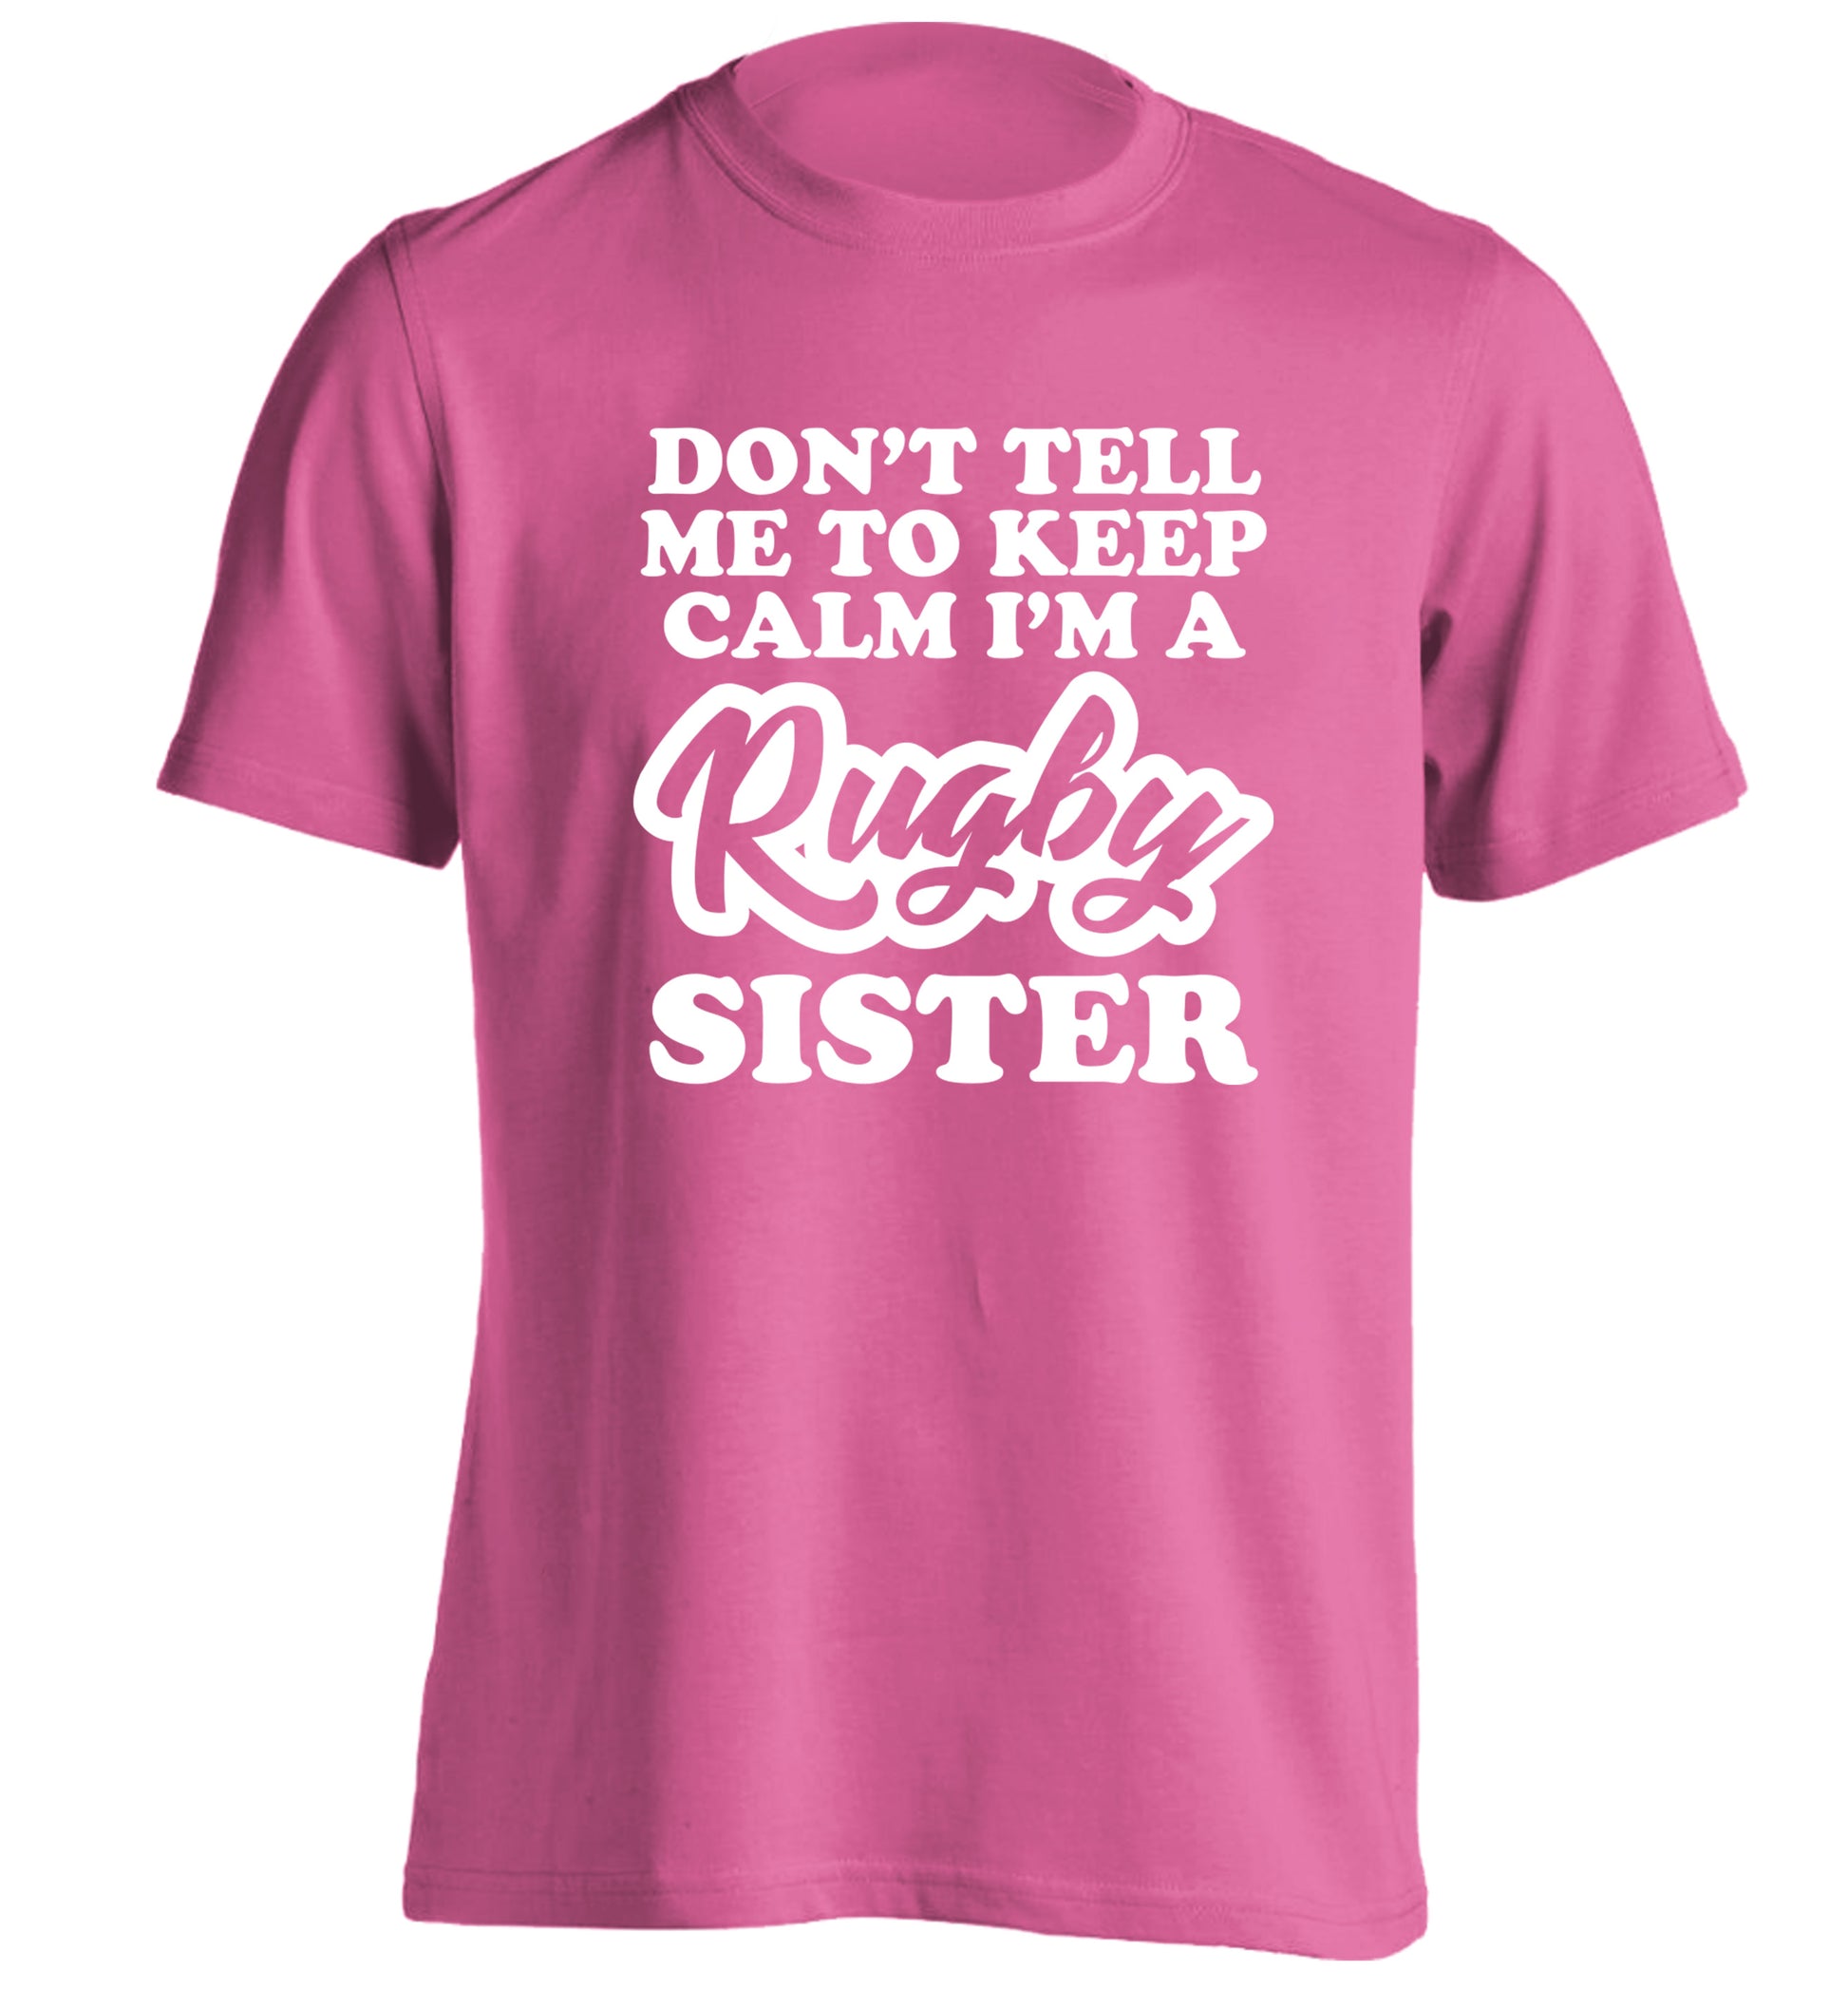 Don't tell me keep calm I'm a rugby sister adults unisex pink Tshirt 2XL